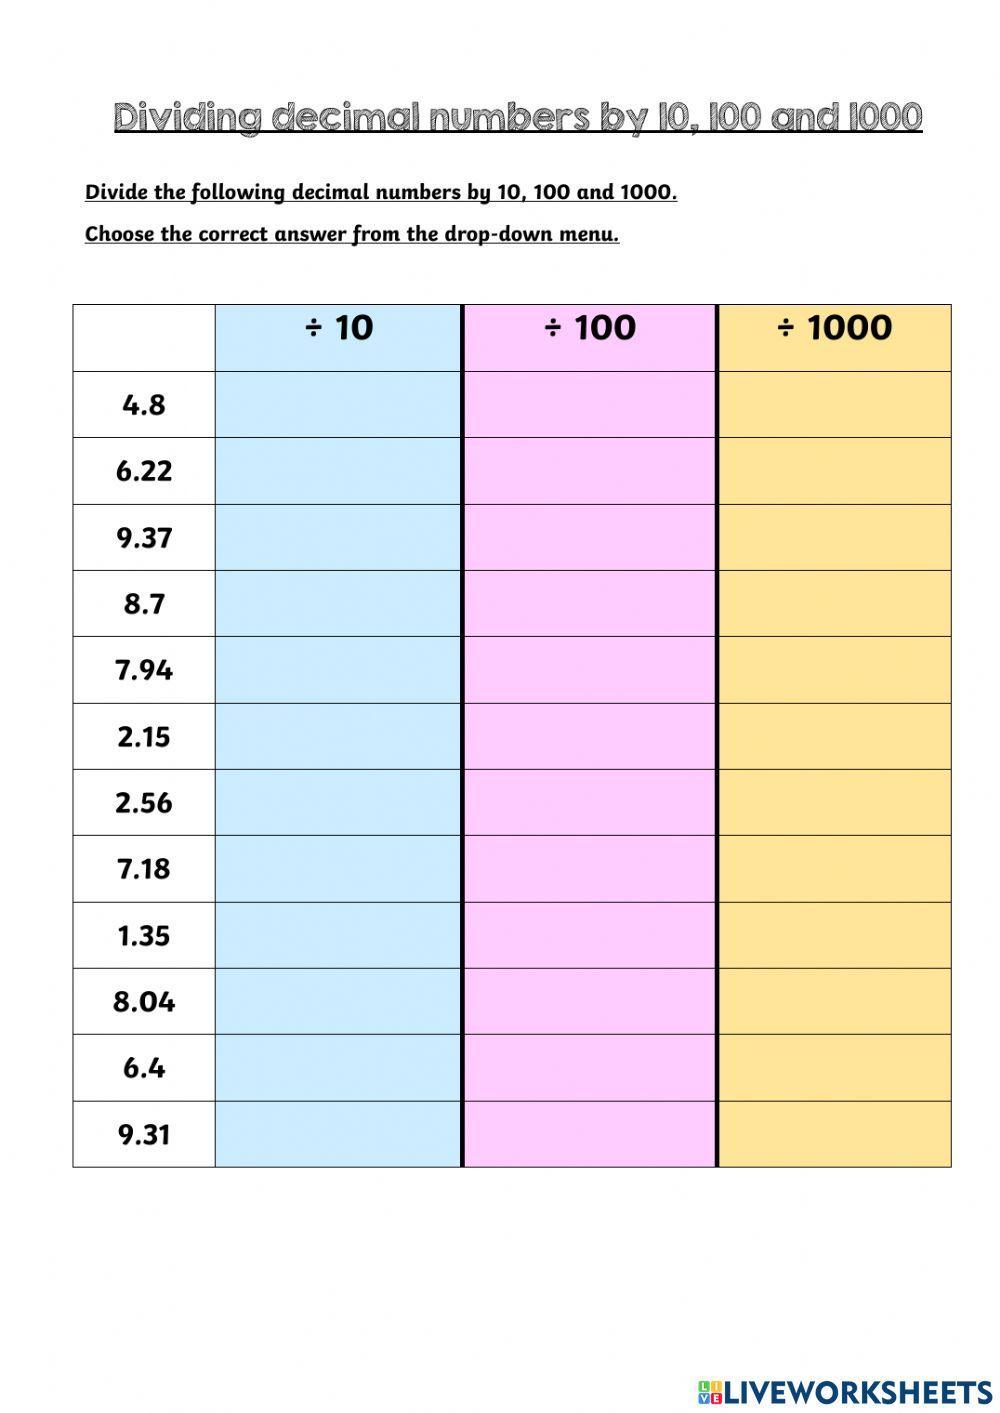 Dividing decimal numbers by 10, 100 and 1000